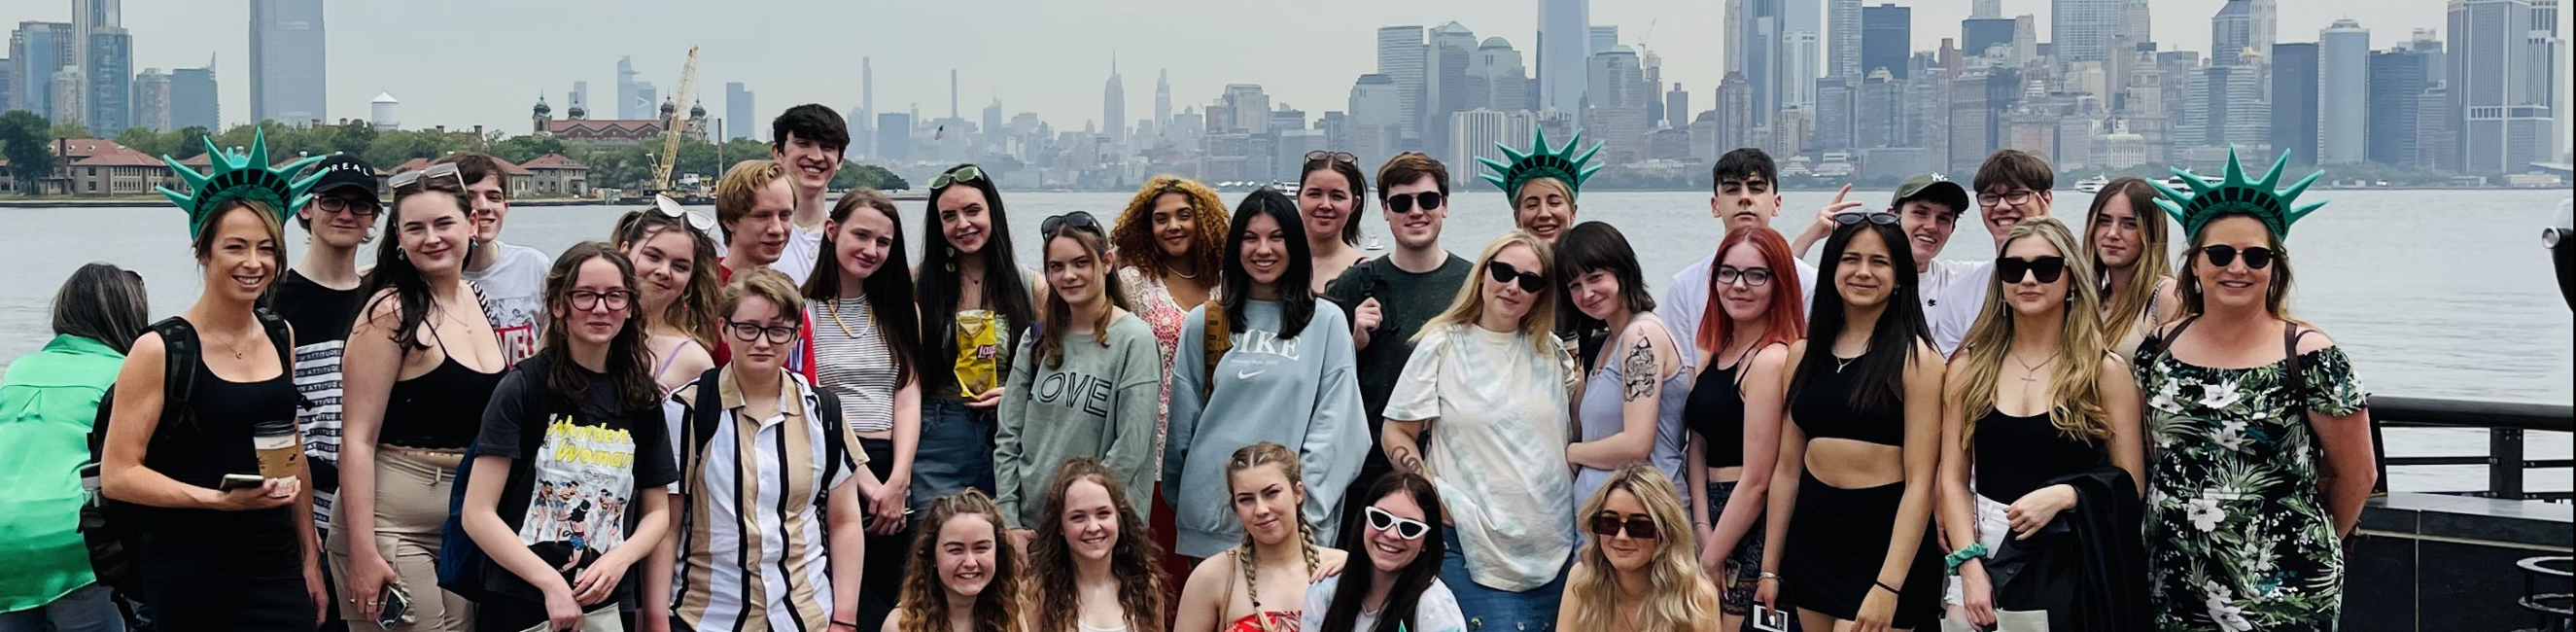 performing arts students stood next to the statue of liberty in new york